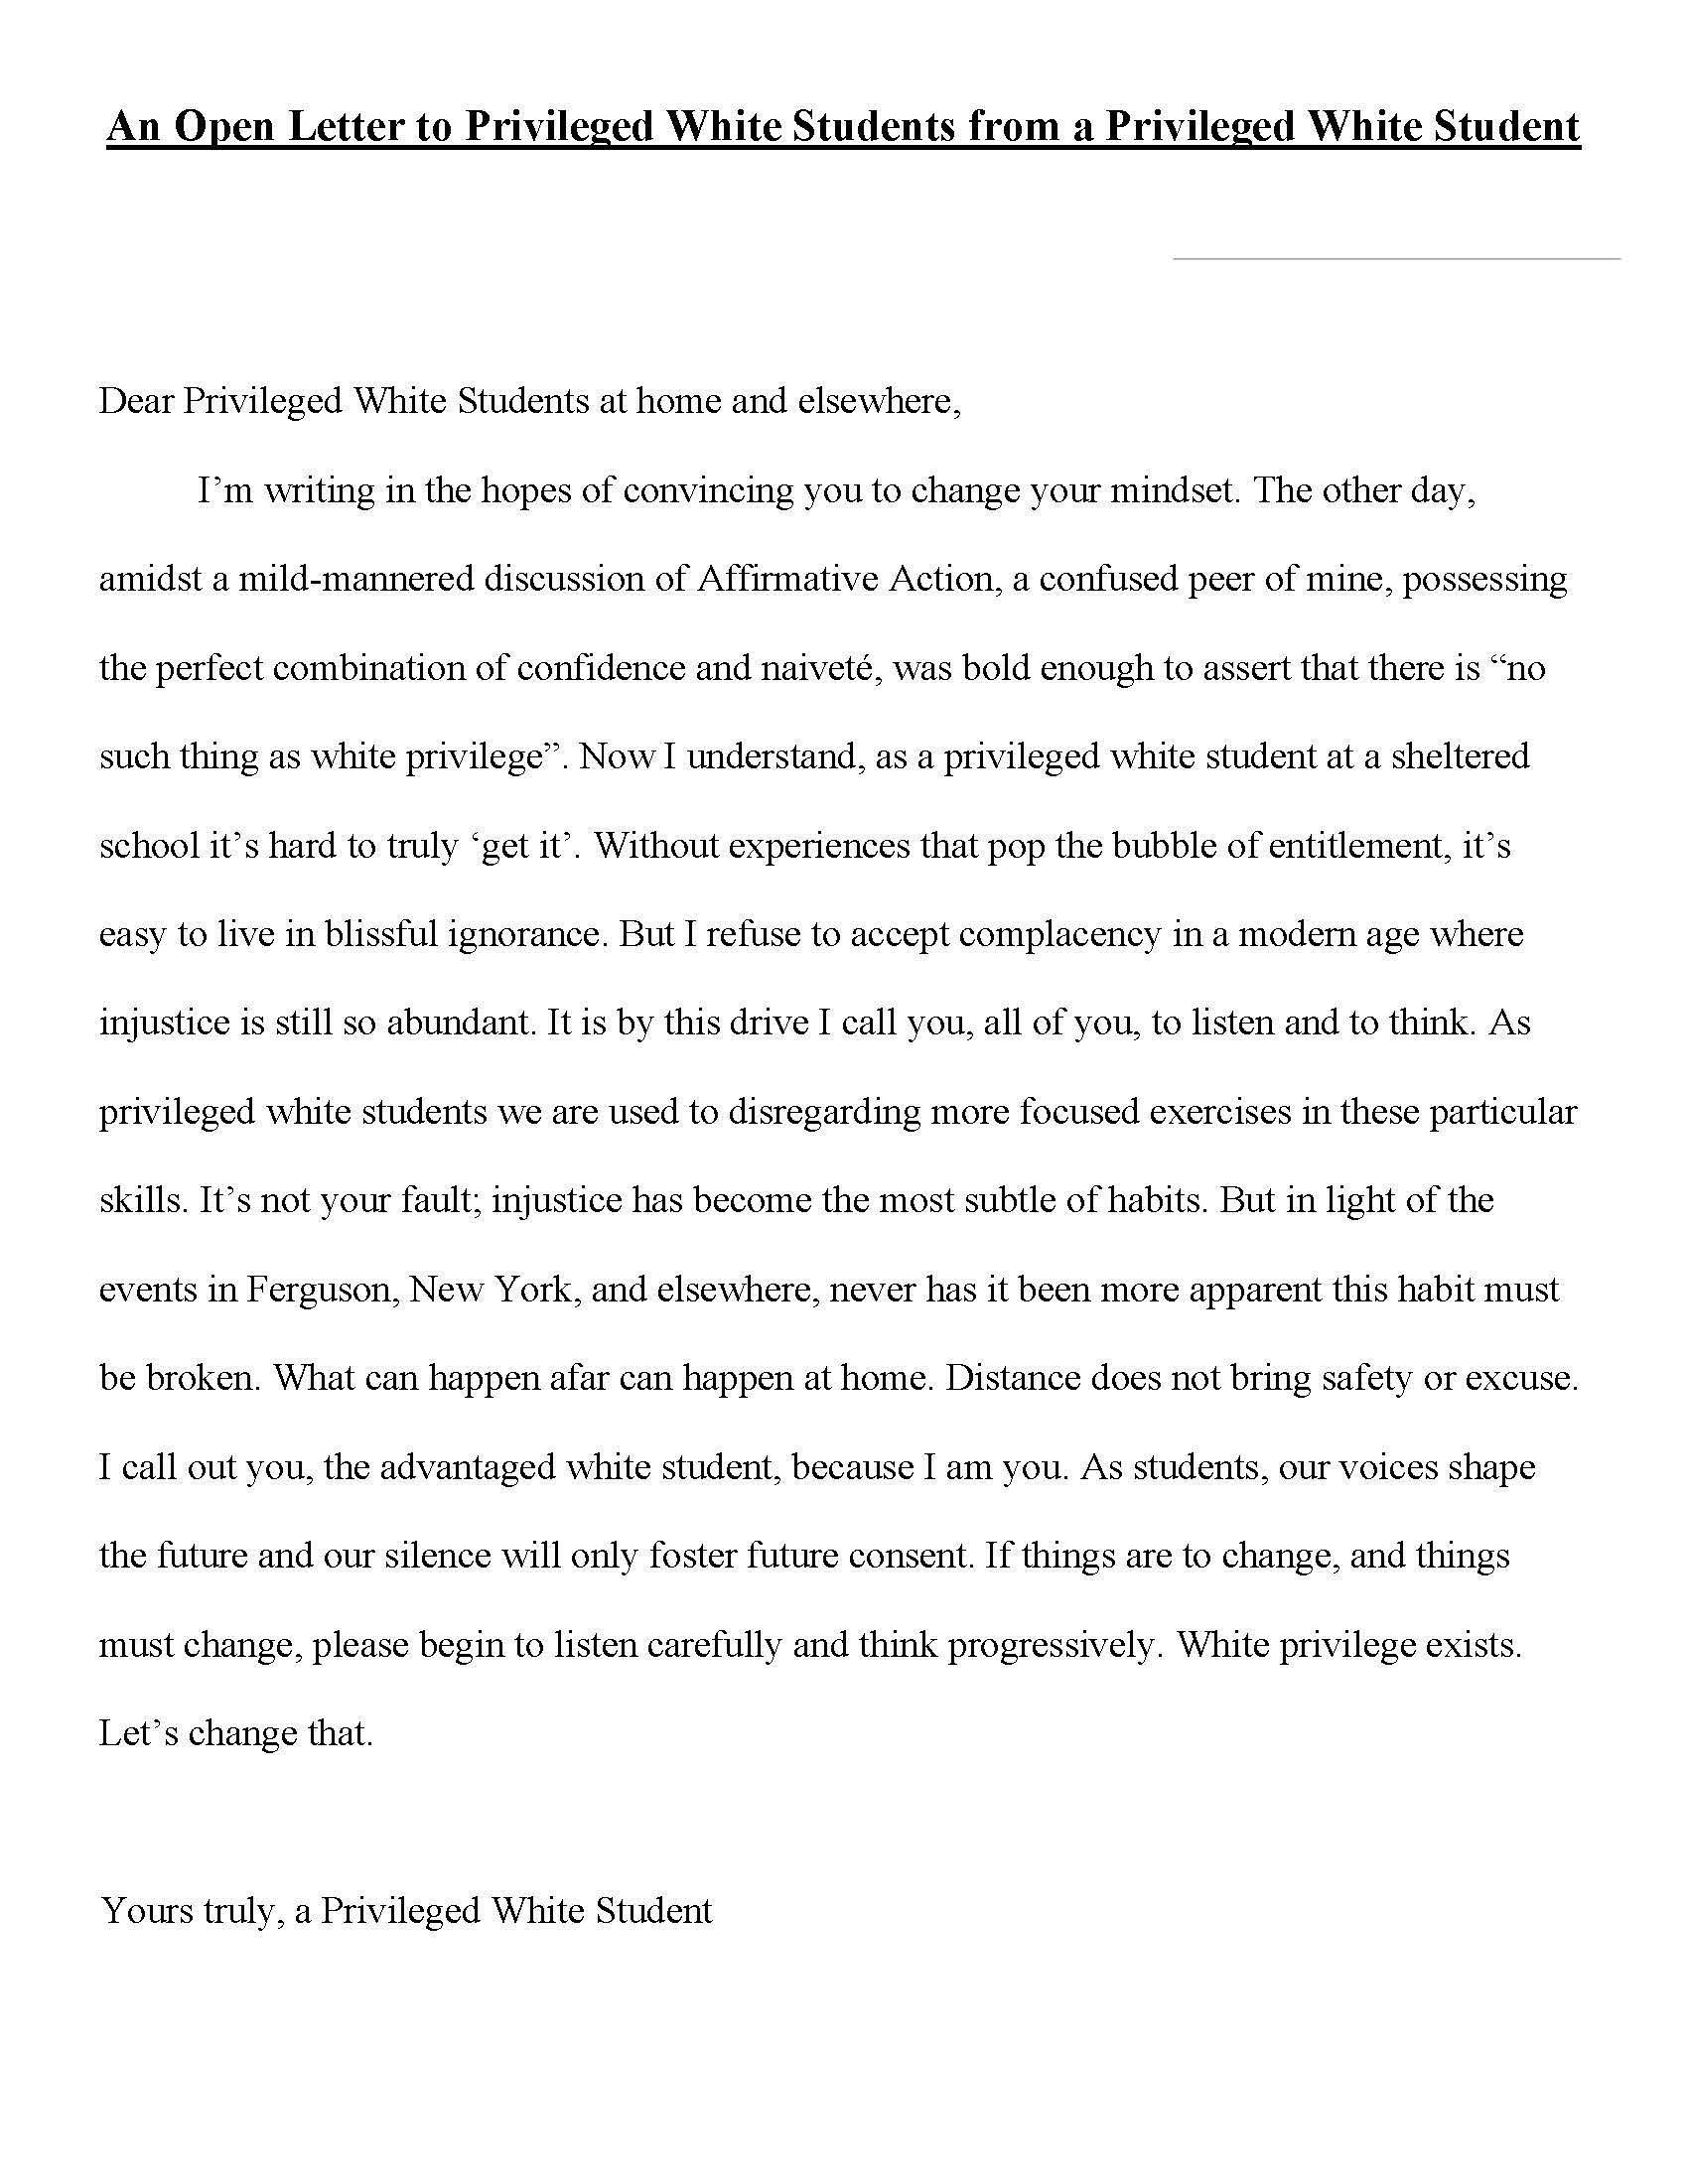 An open letter to privileged white students from a privileged white student by D P